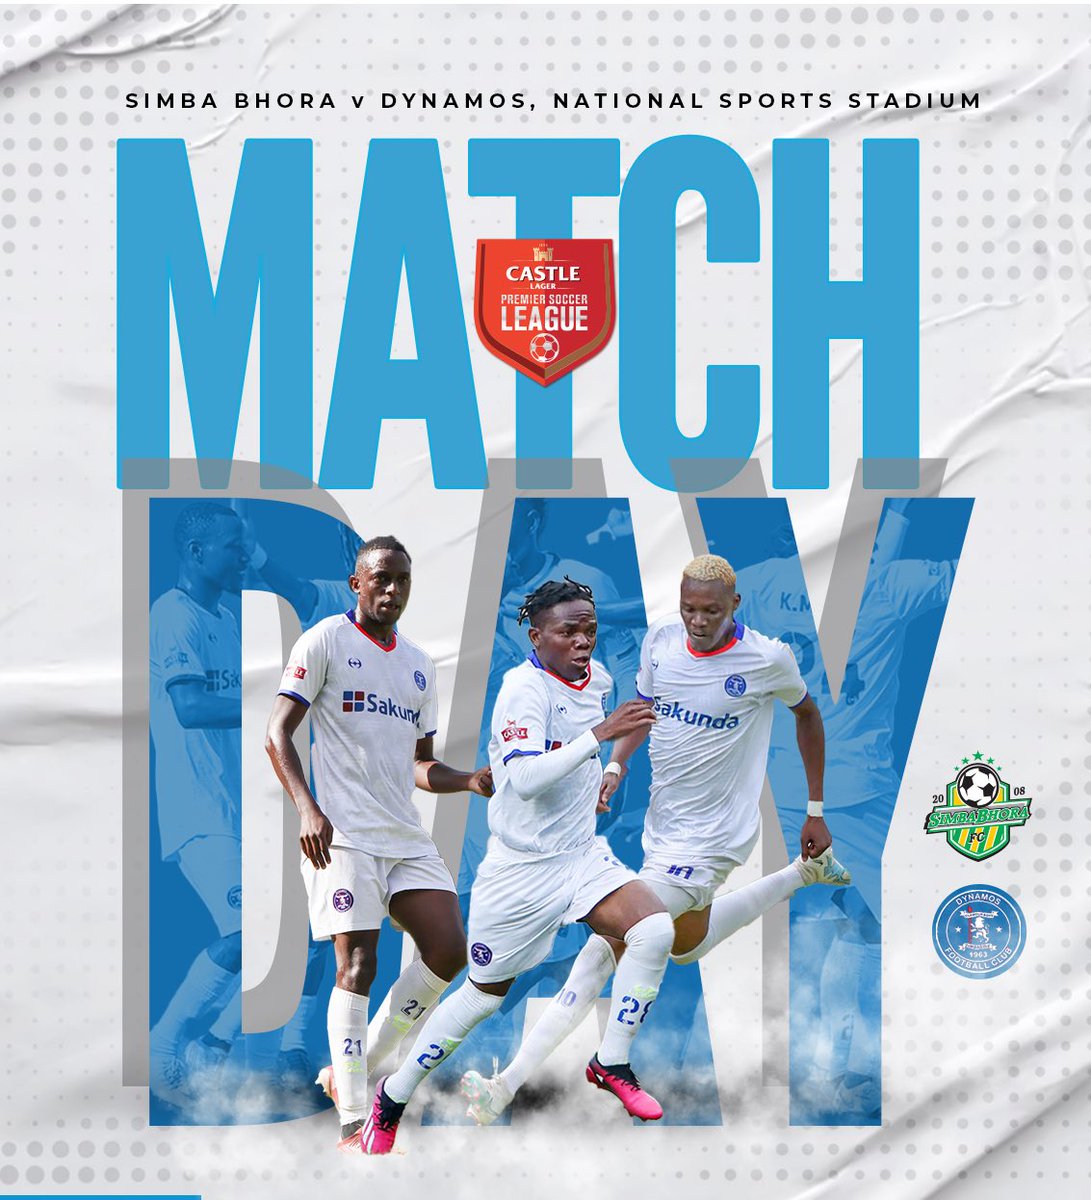 𝑴𝒂𝒕𝒄𝒉𝒅𝒂𝒚 𝒕𝒉𝒓𝒆𝒆 
Simba Bhora vs Dynamos FC
Tickets $2 Rest of ground, $5 VIP and $10 VVIP.
#GlamourBoys #DembareAt60 #DembareBhora